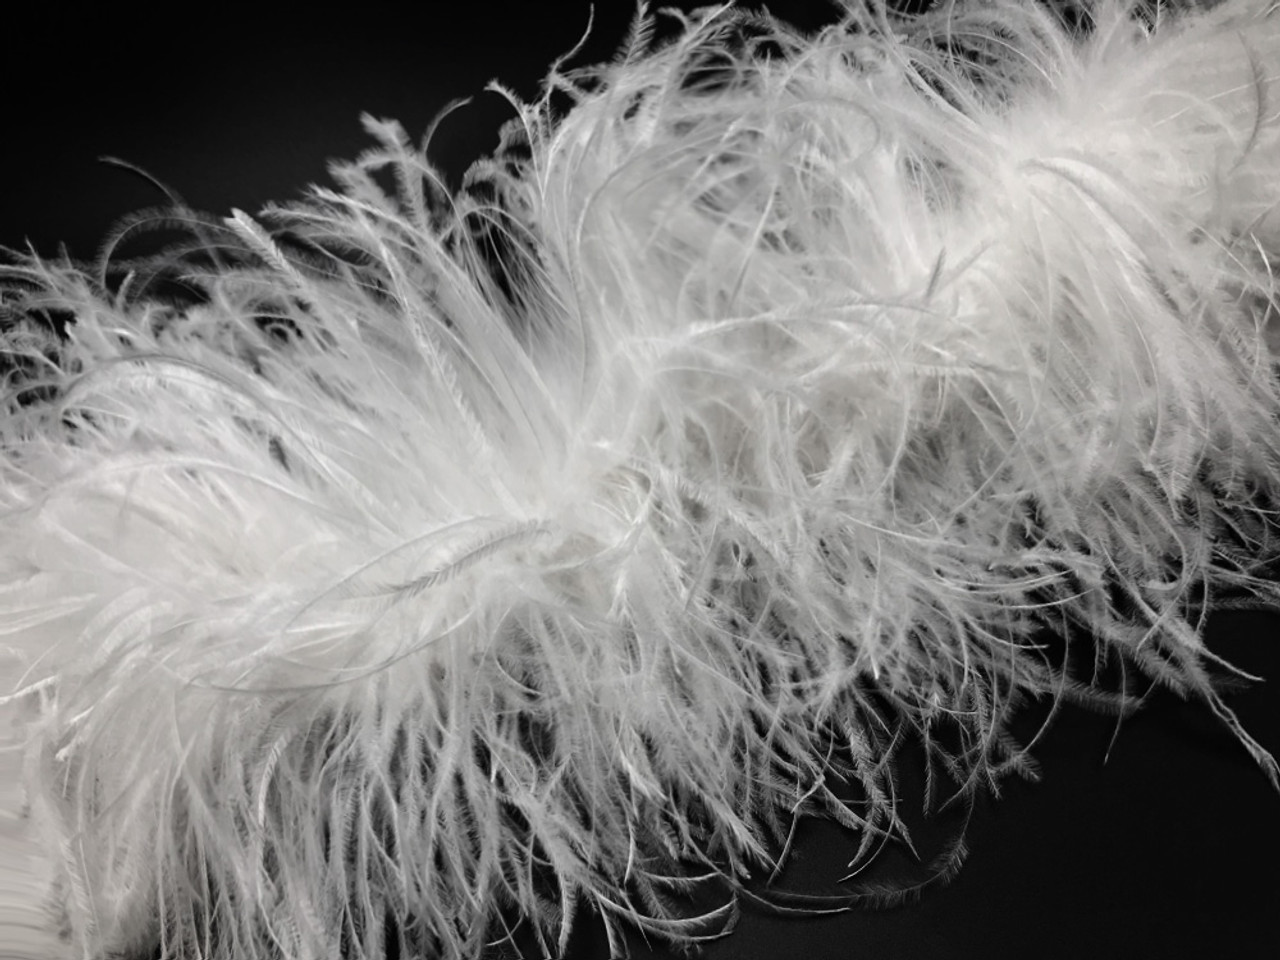 2 Yards 5-Ply Snow White Ostrich Fluffy Feather Boa